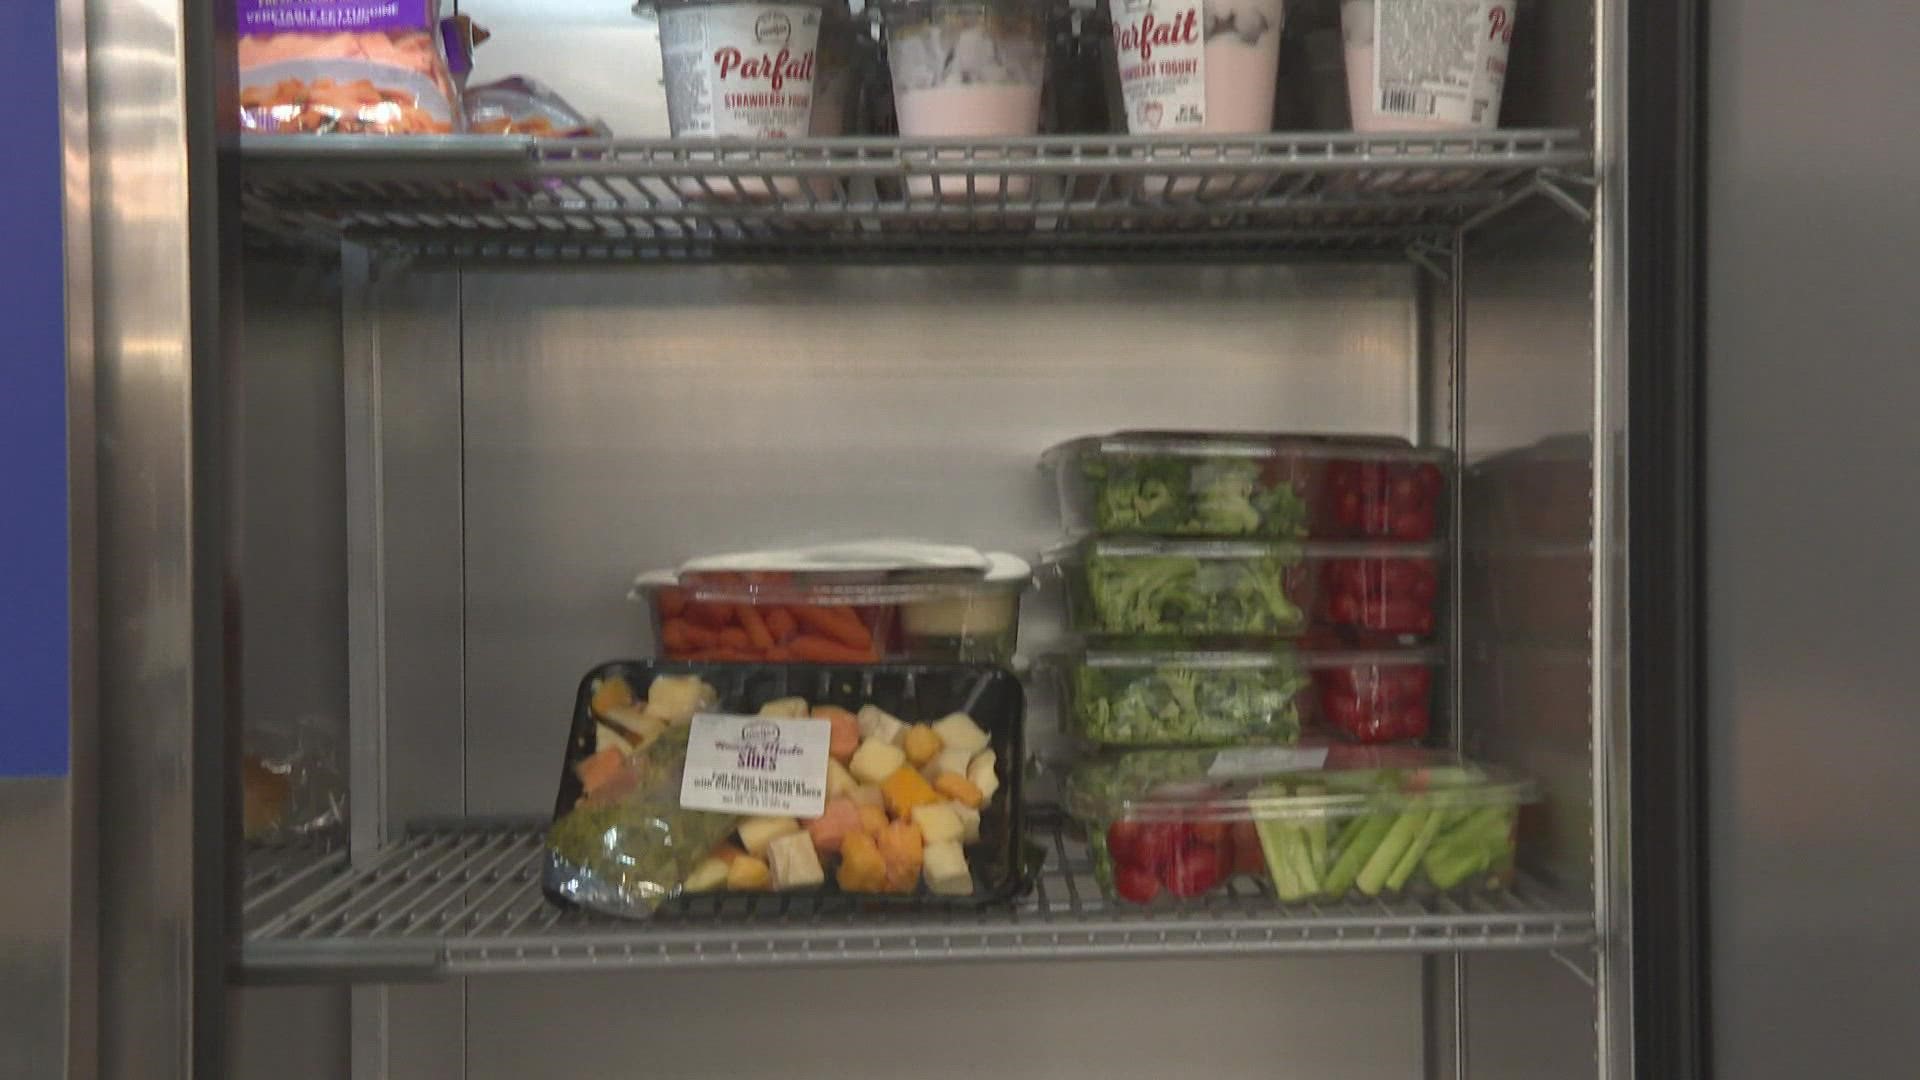 Flash food coolers are inside every Meijer store and many family fare's in West Michigan.